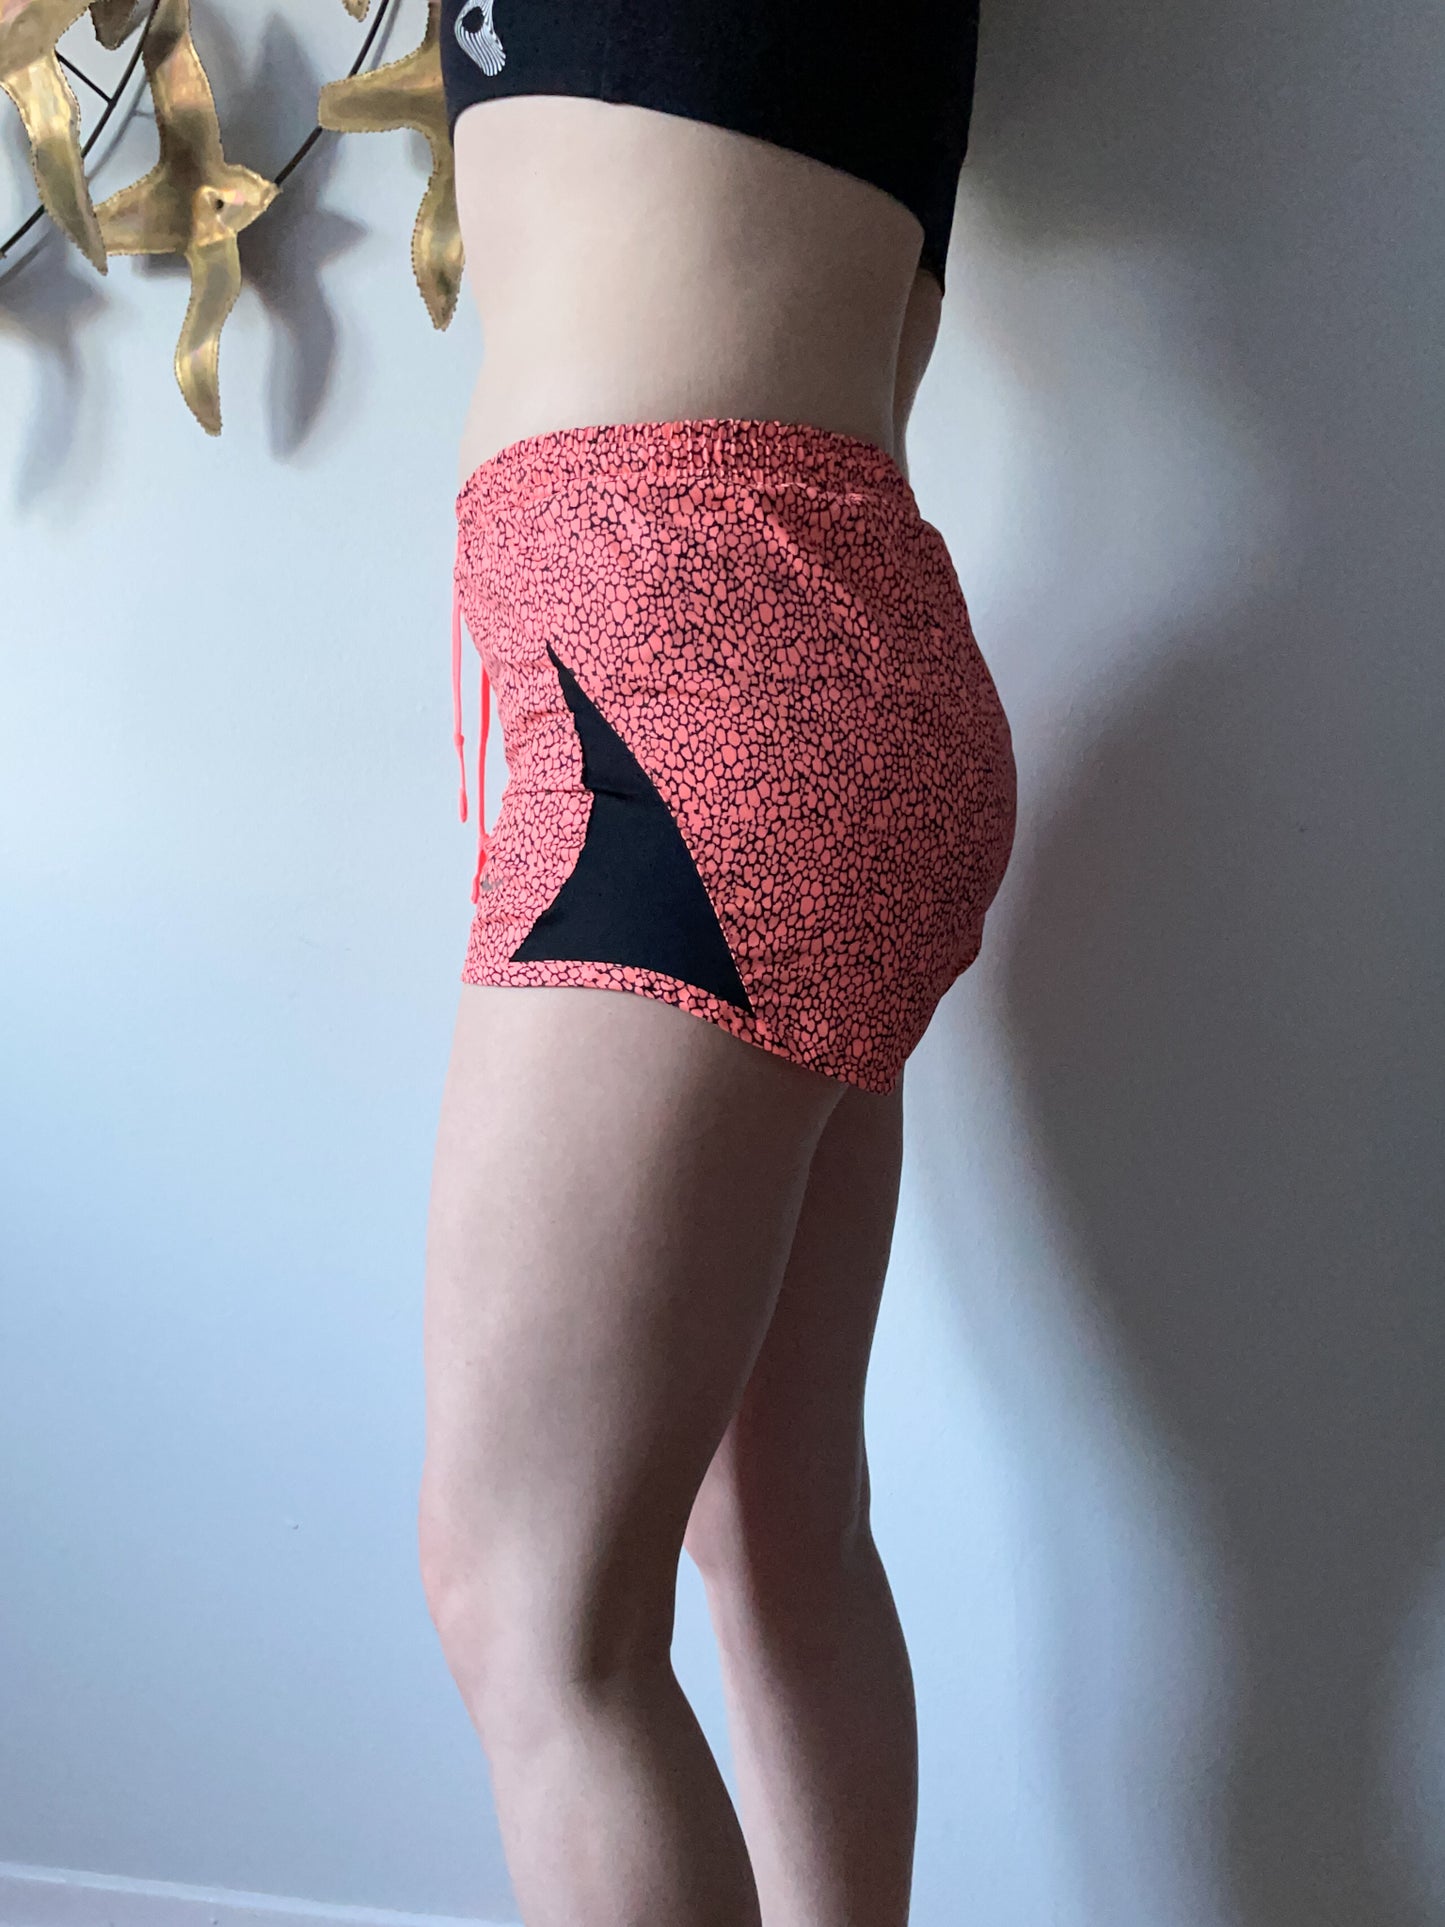 Nike Neon Pink Black Graphic Lined Dry Fit Running Shorts - XS